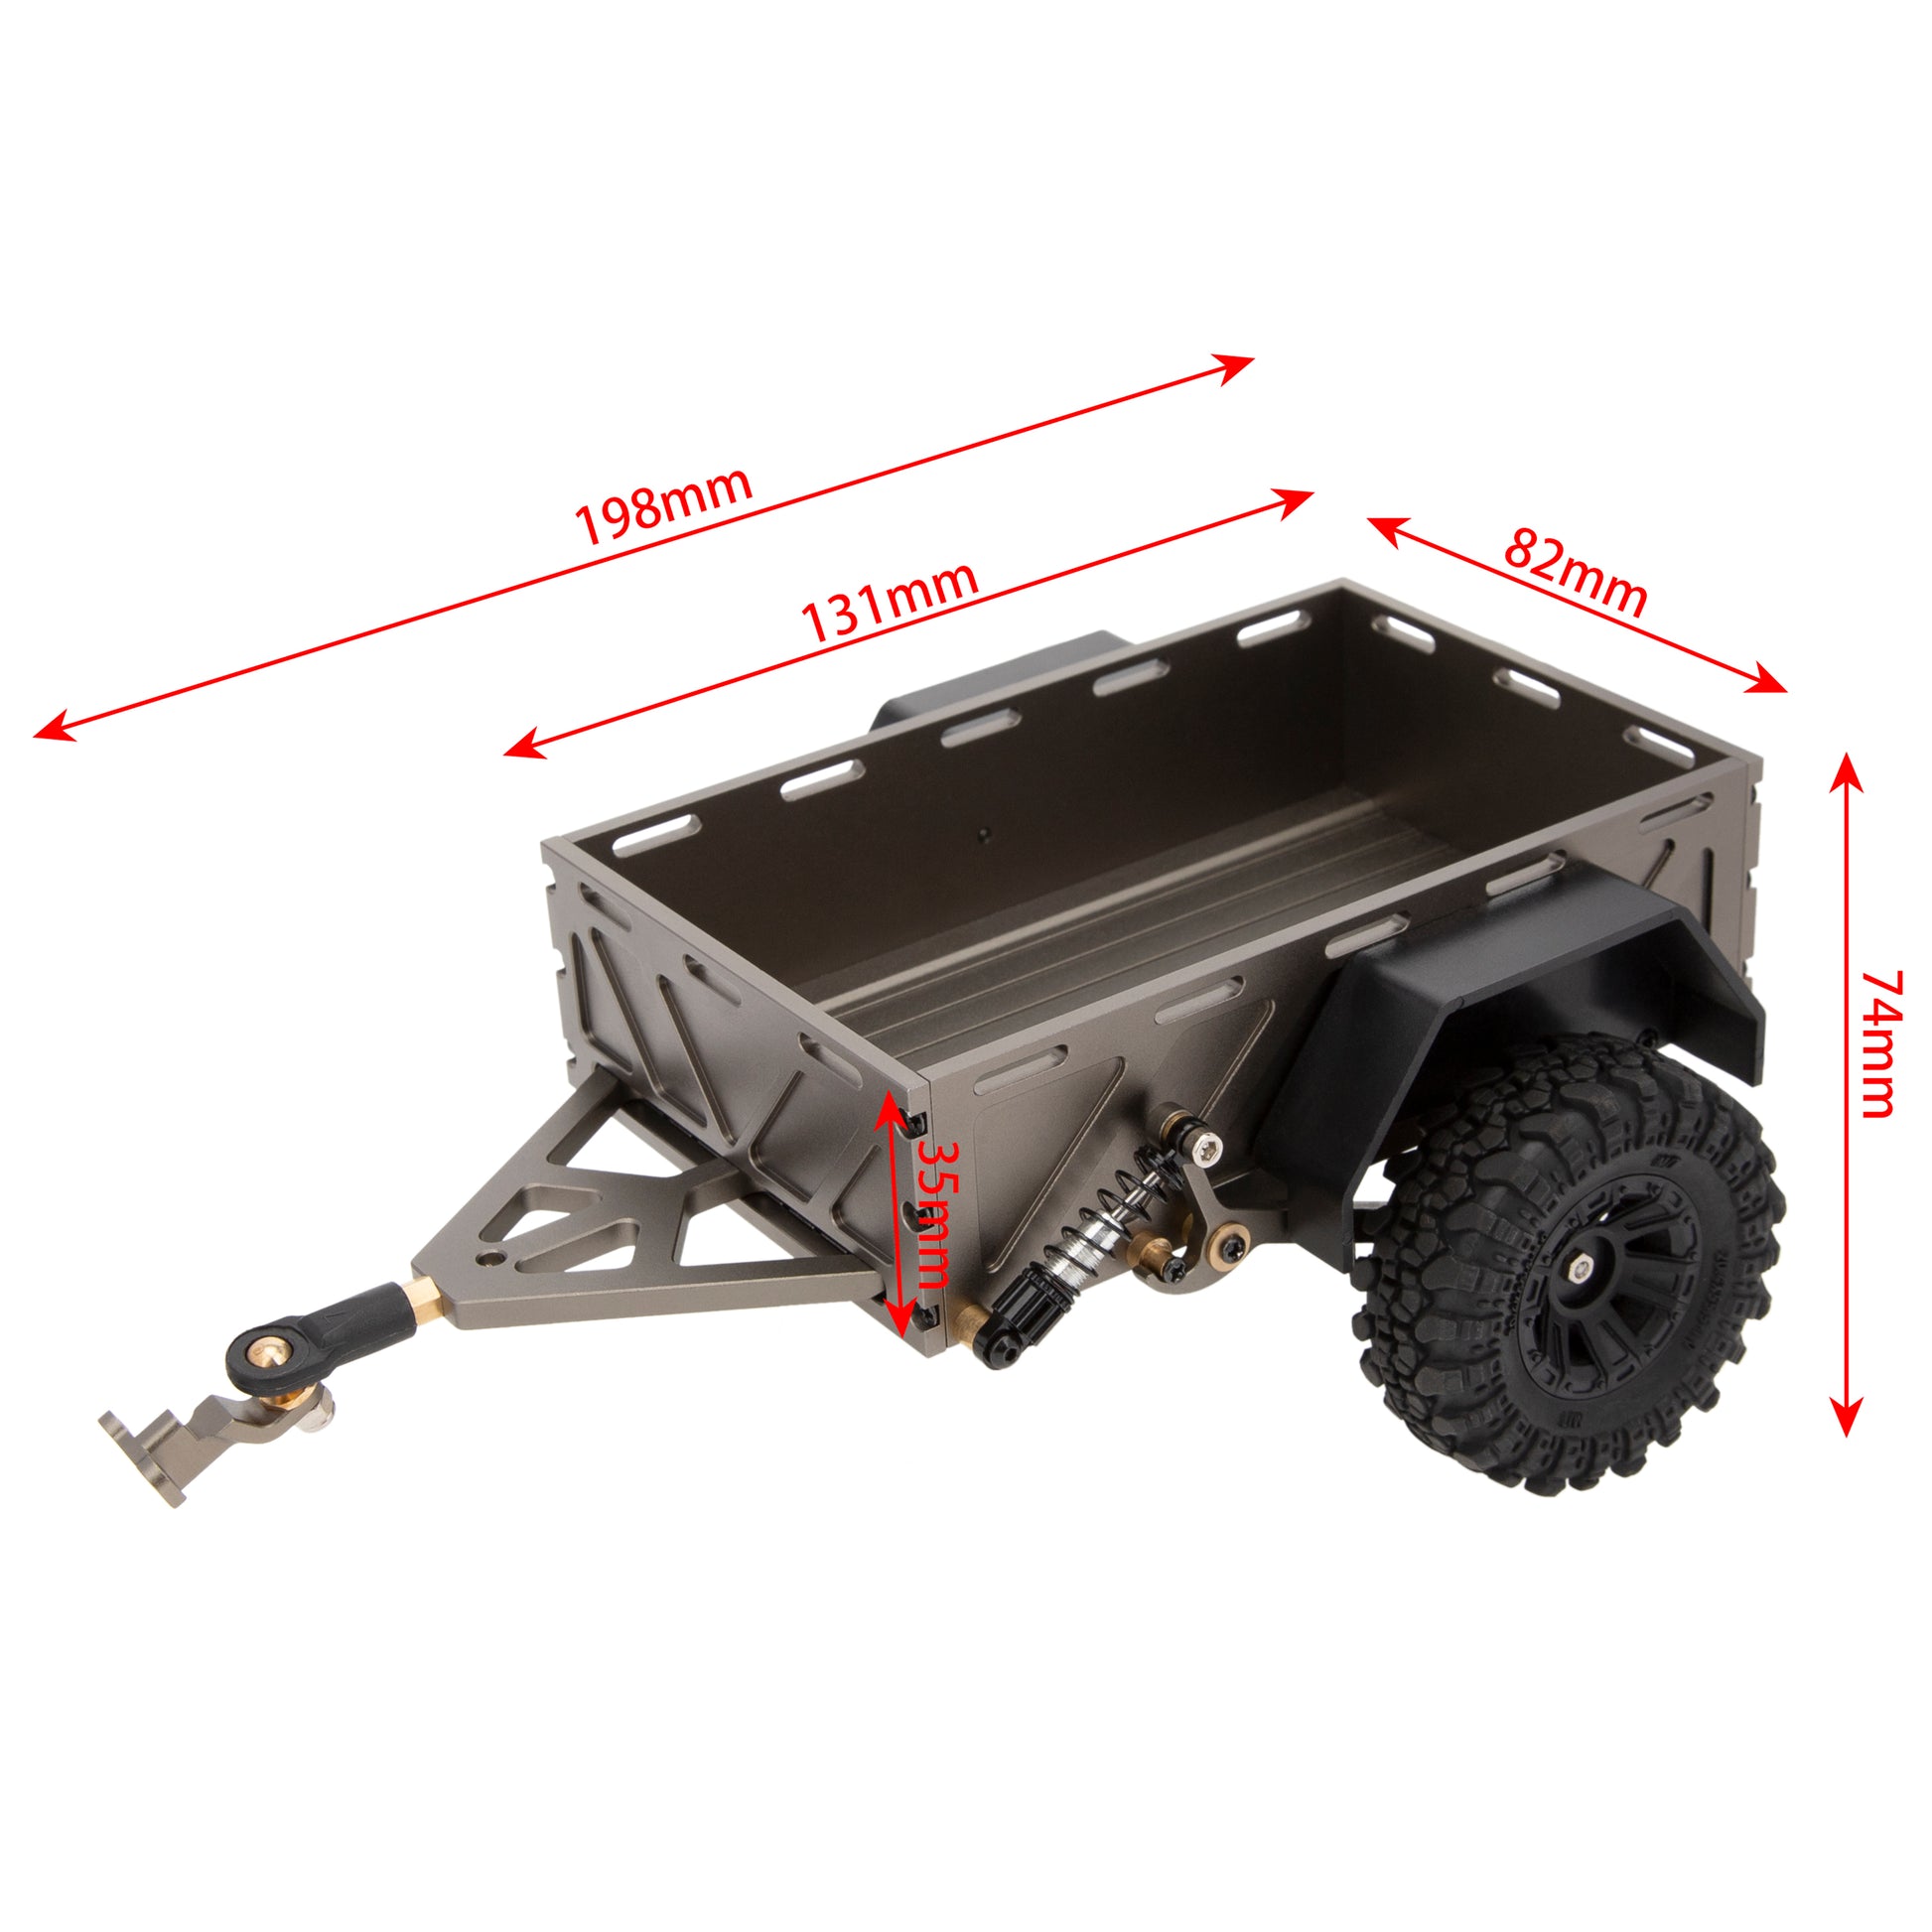 Coffee Utility trailer car with hitch size for TRX4M